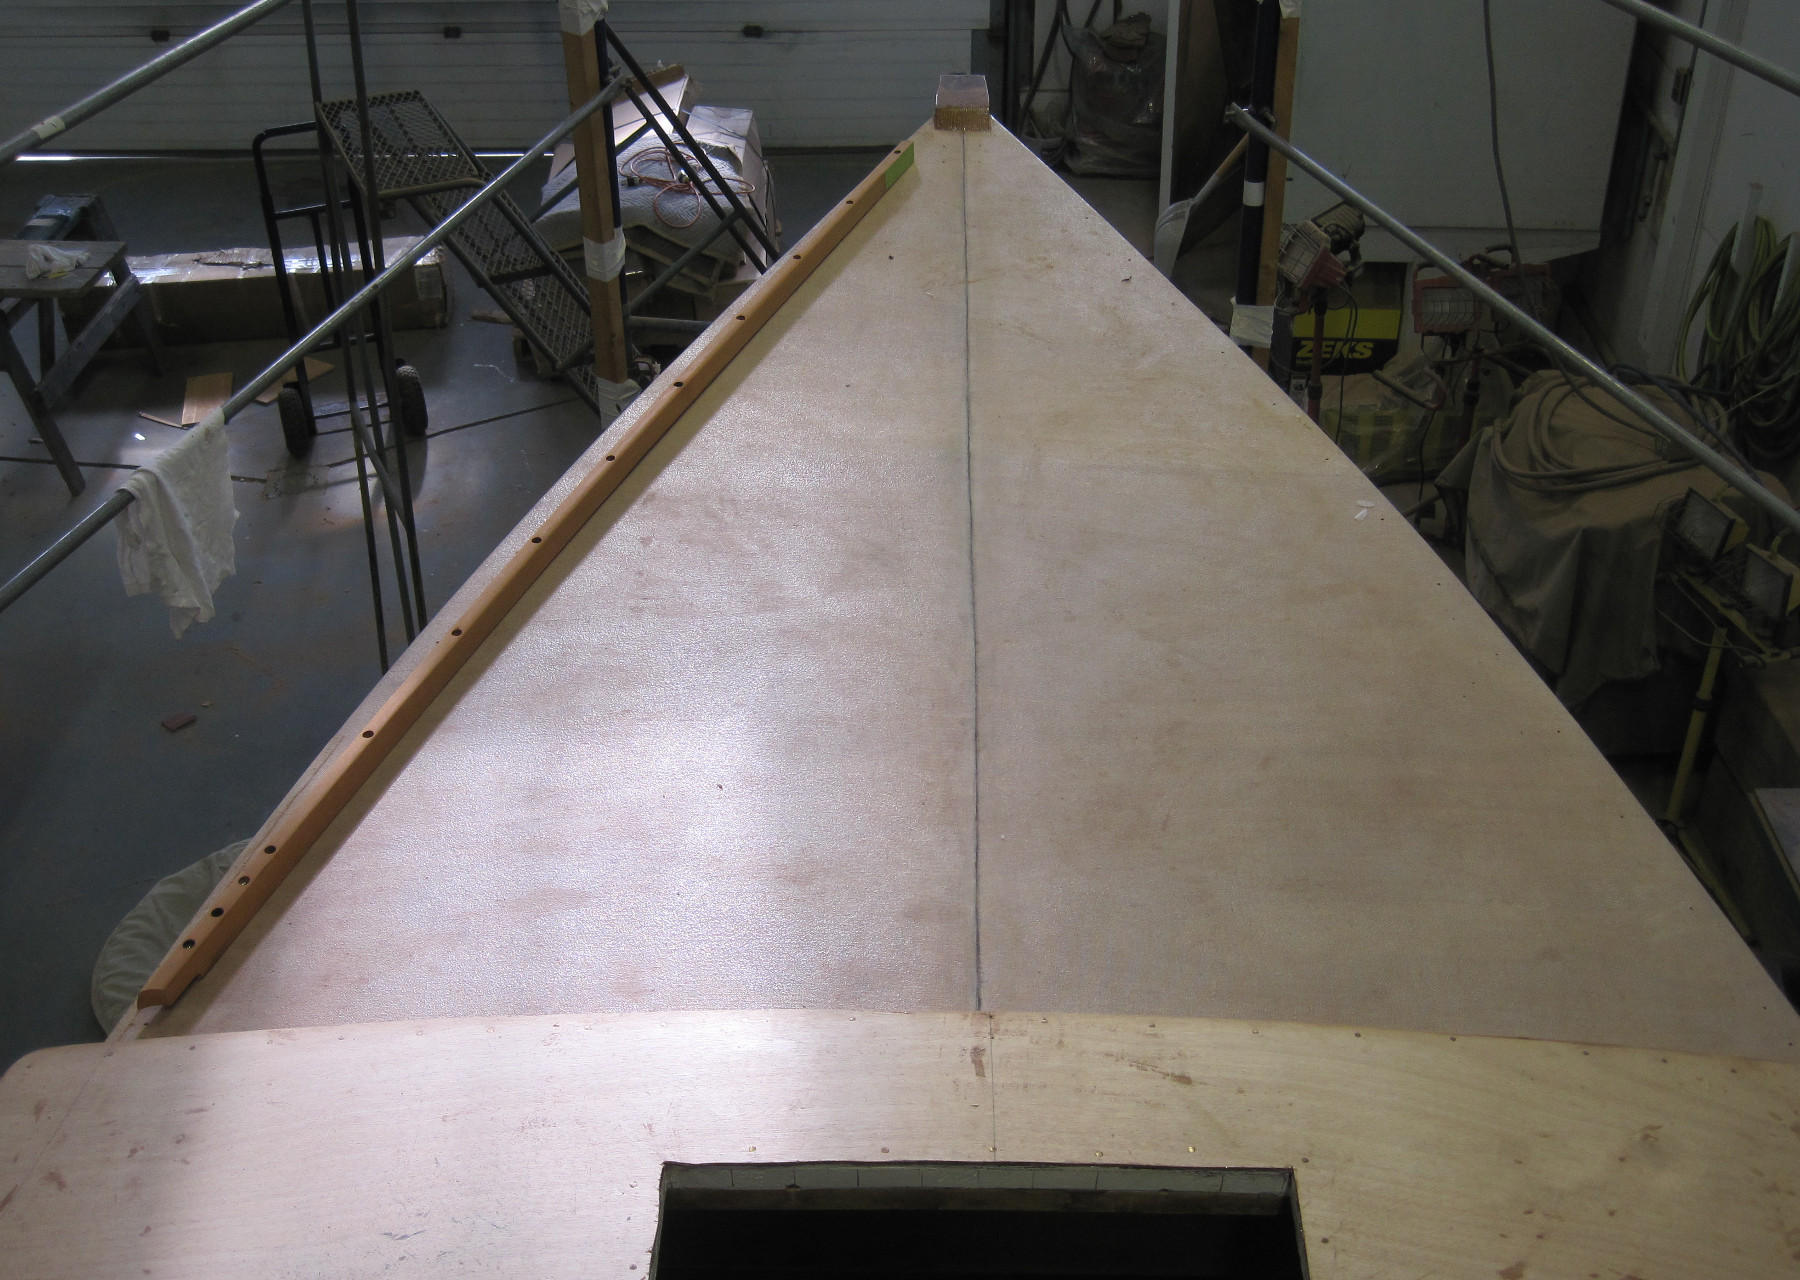 Wooden Boat Restoration - Kestrel - Fast forward and here is Kestrel's bow with new stem work, new plywood, and sheathed in Dynel.